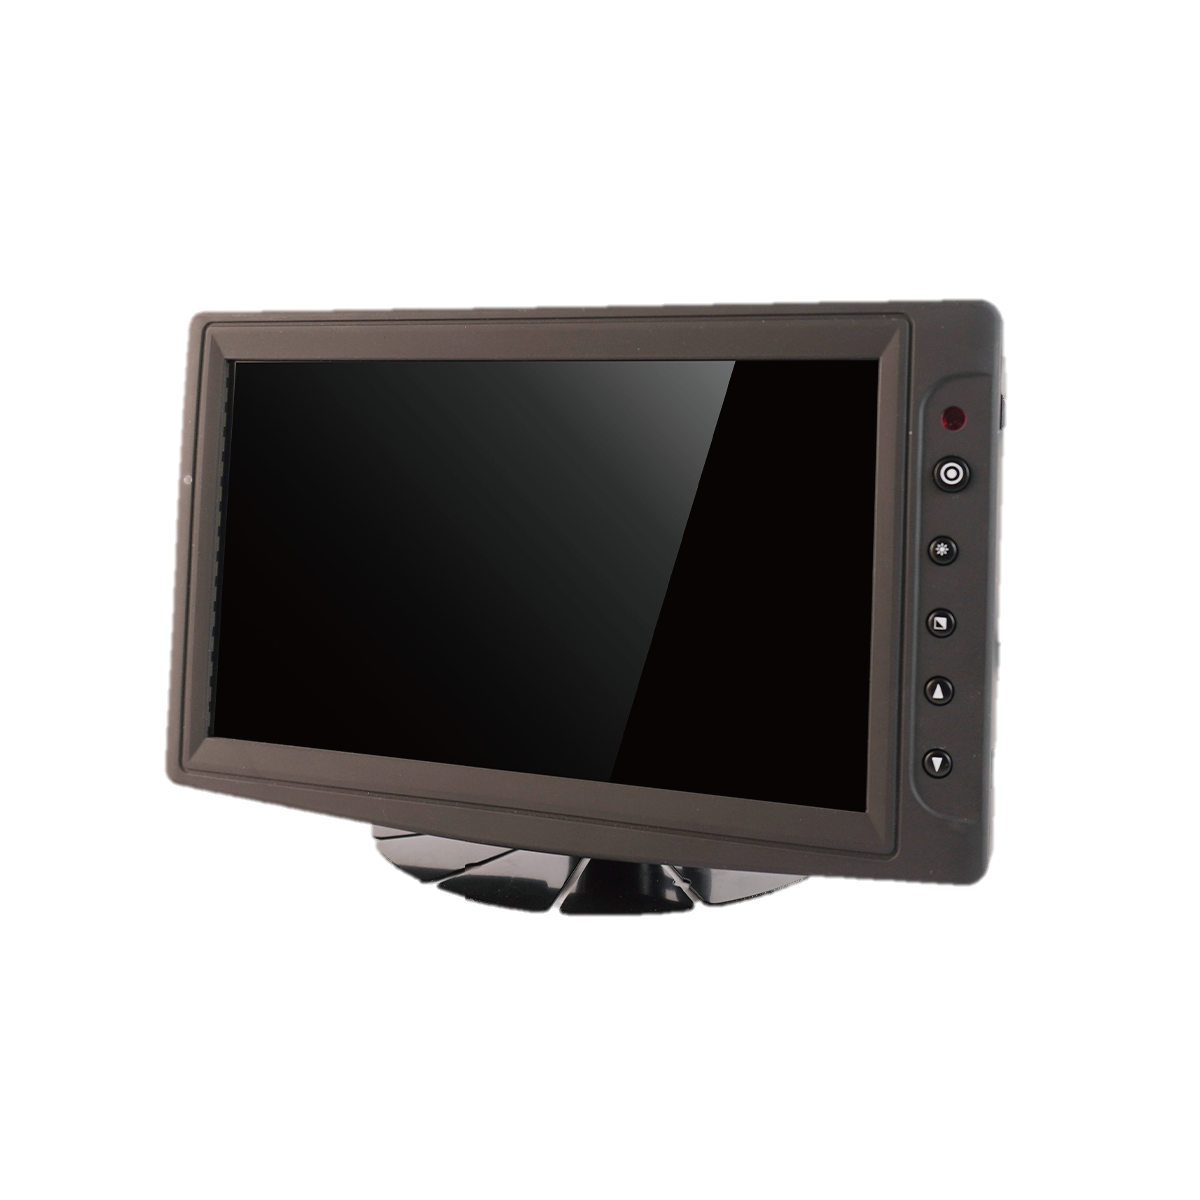 SEF800TPC(W)-LUH-PCT is an industrial touch monitor which can be used to any kinds of vehicles.